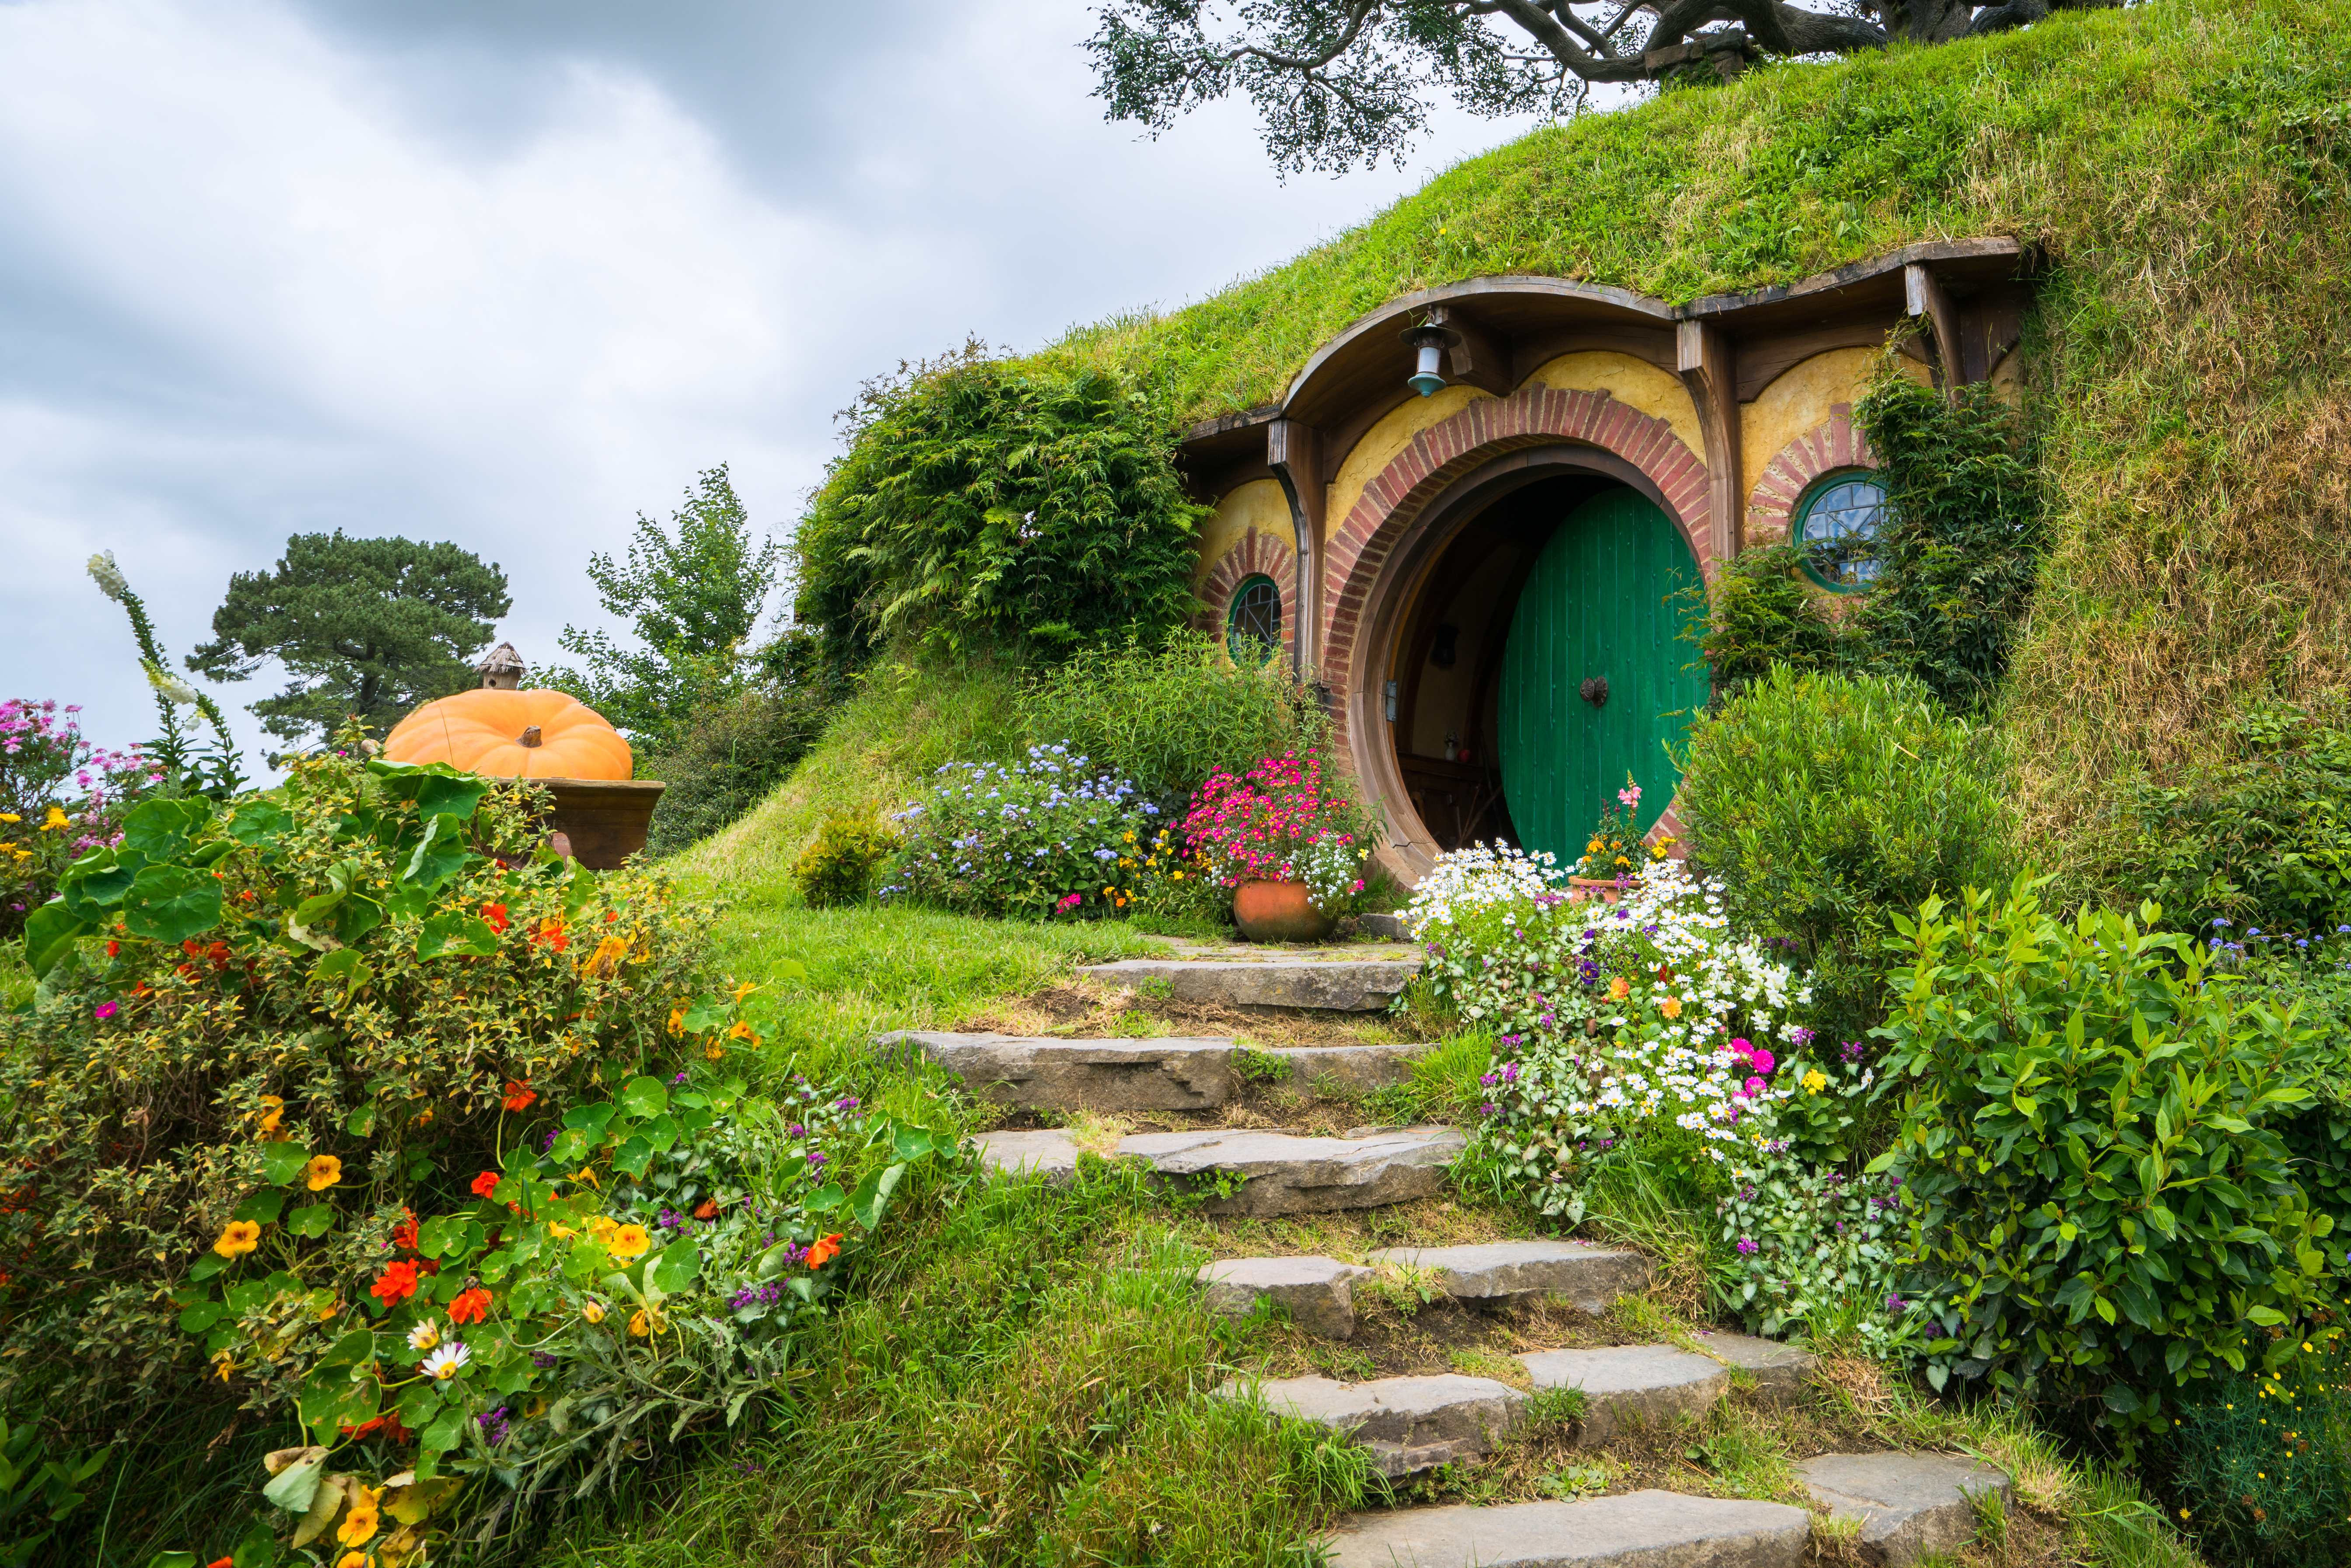 Visit These Movie Filming Locations - Hobbiton Movie Set in New Zealand